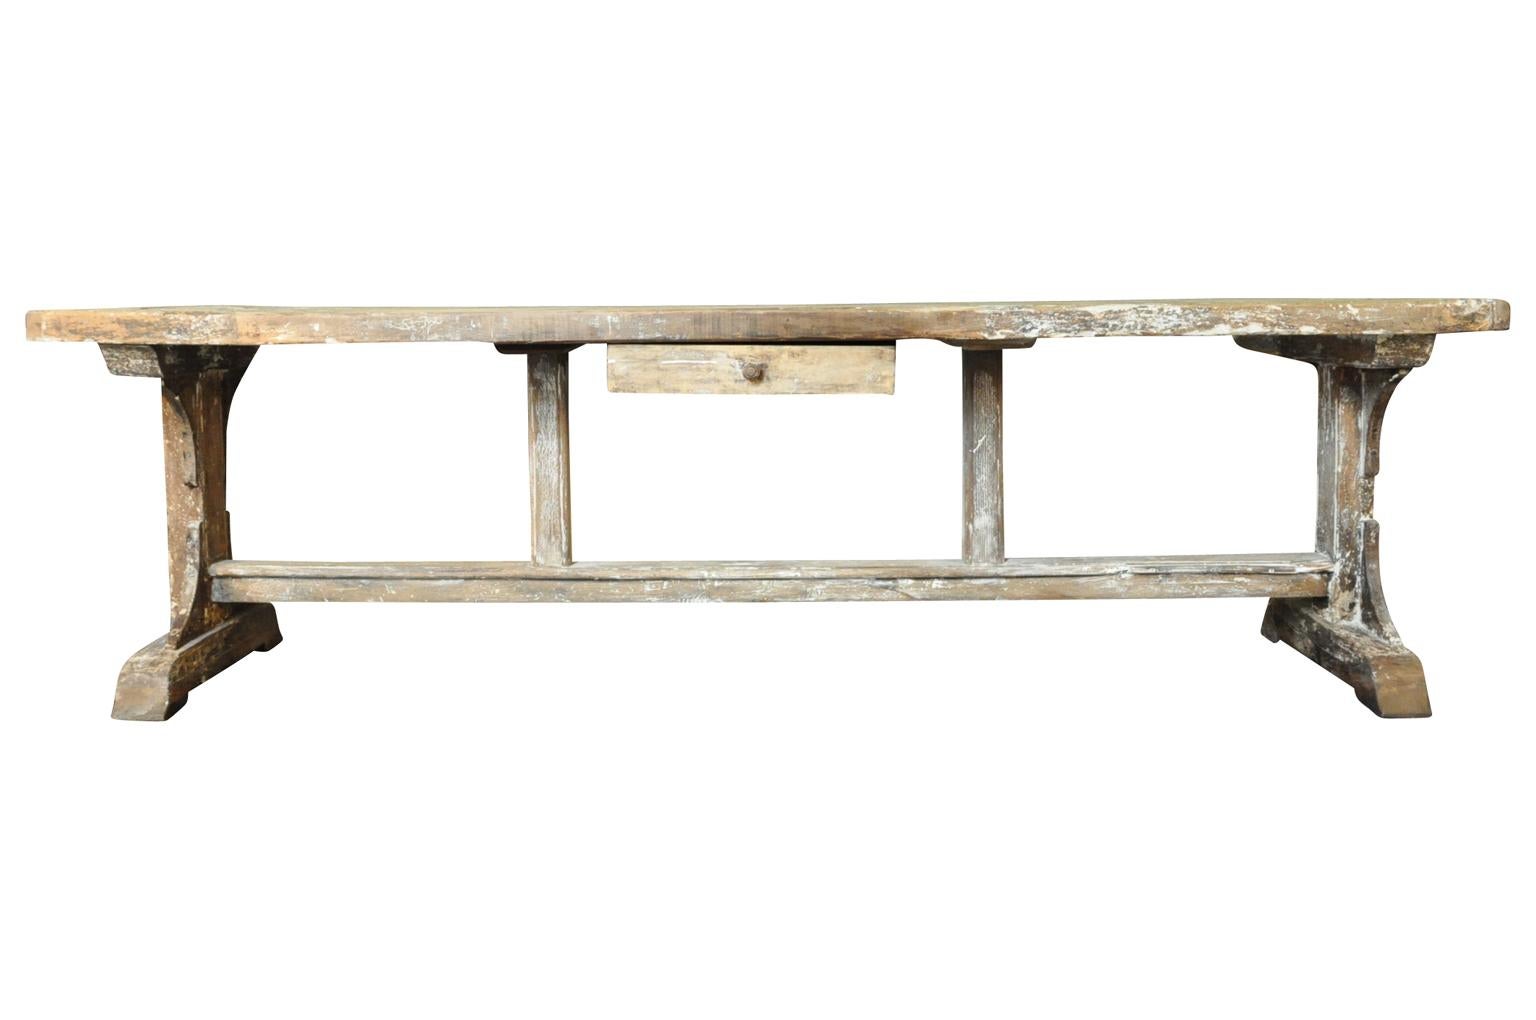 A very handsome early 19th century console table from the Provence region of France.  Soundly constructed from scraped beech wood with a single drawer.  Perfect as a long console table or as a sofa table.